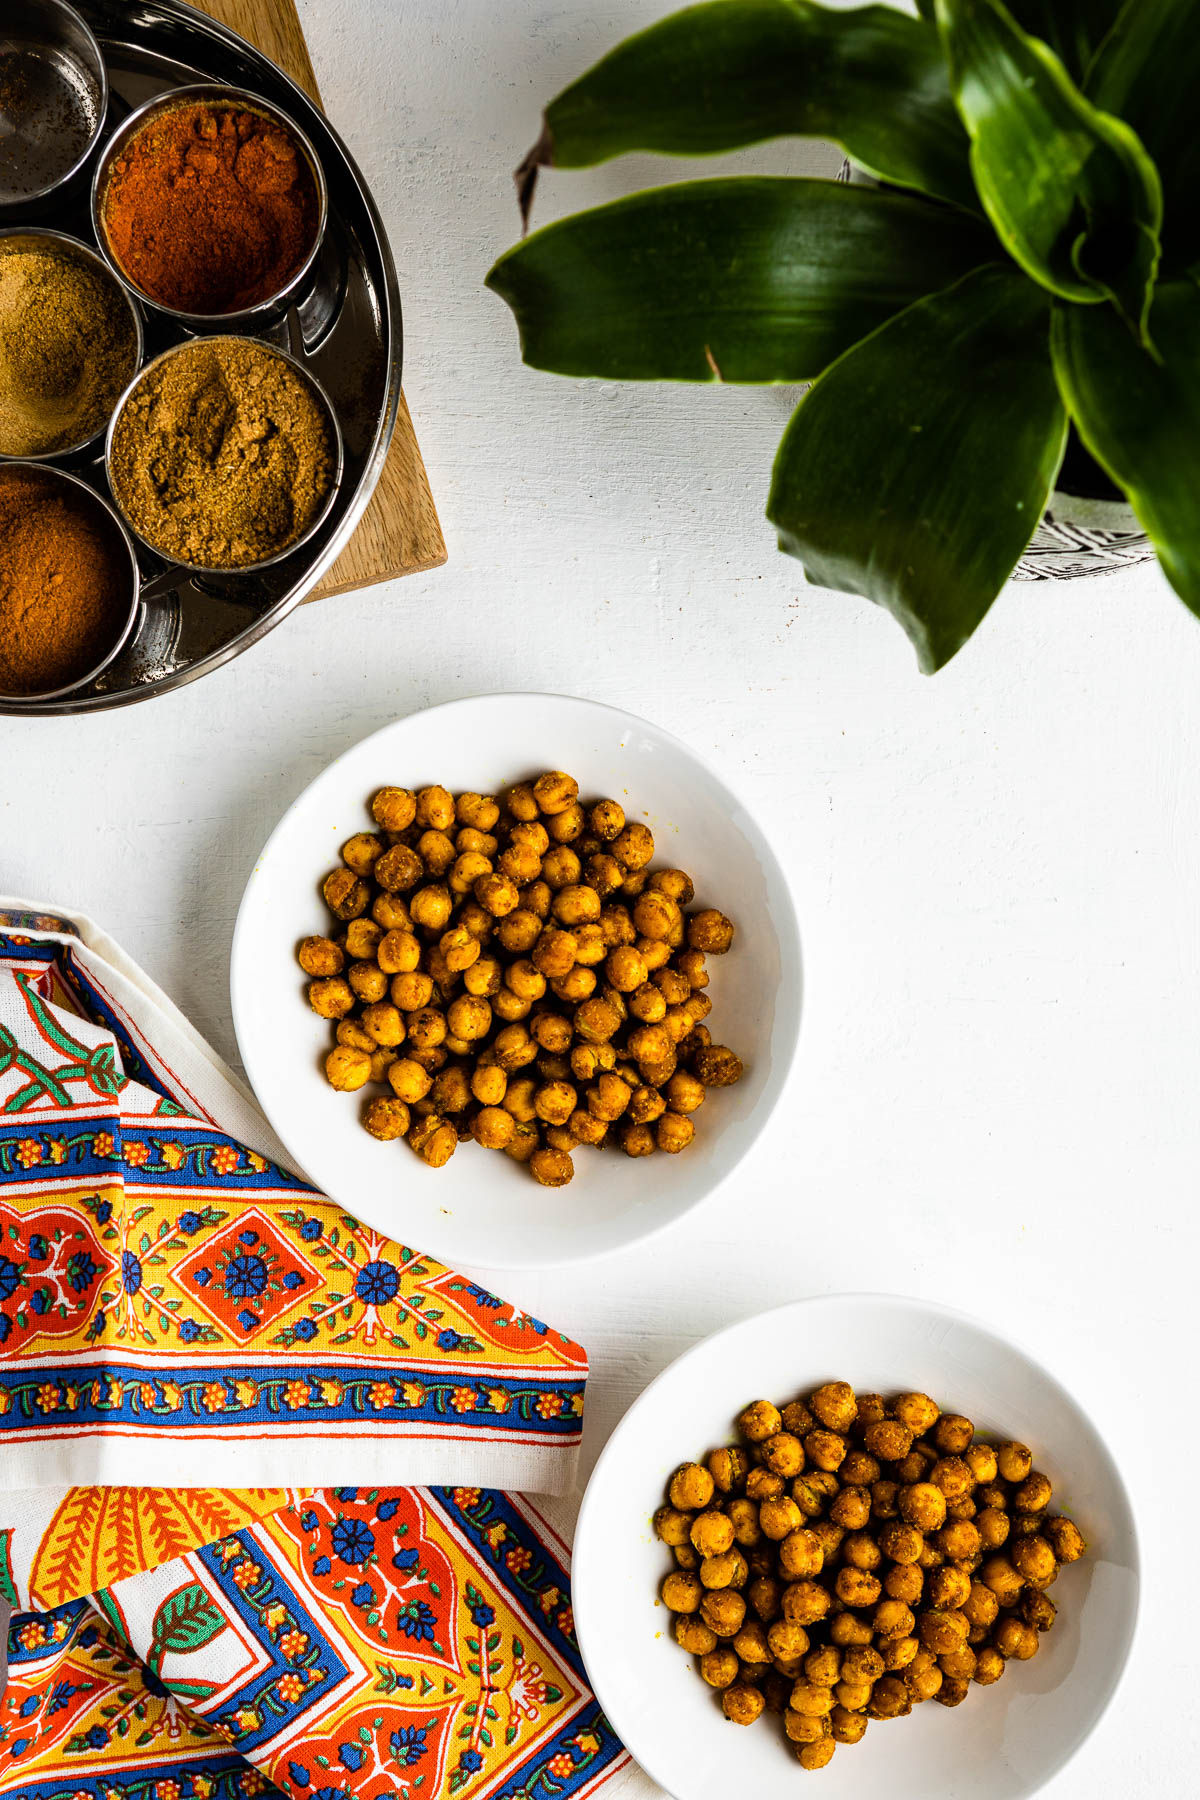 2 white bowls of roasted chickpeas next to a colorful tea towel.